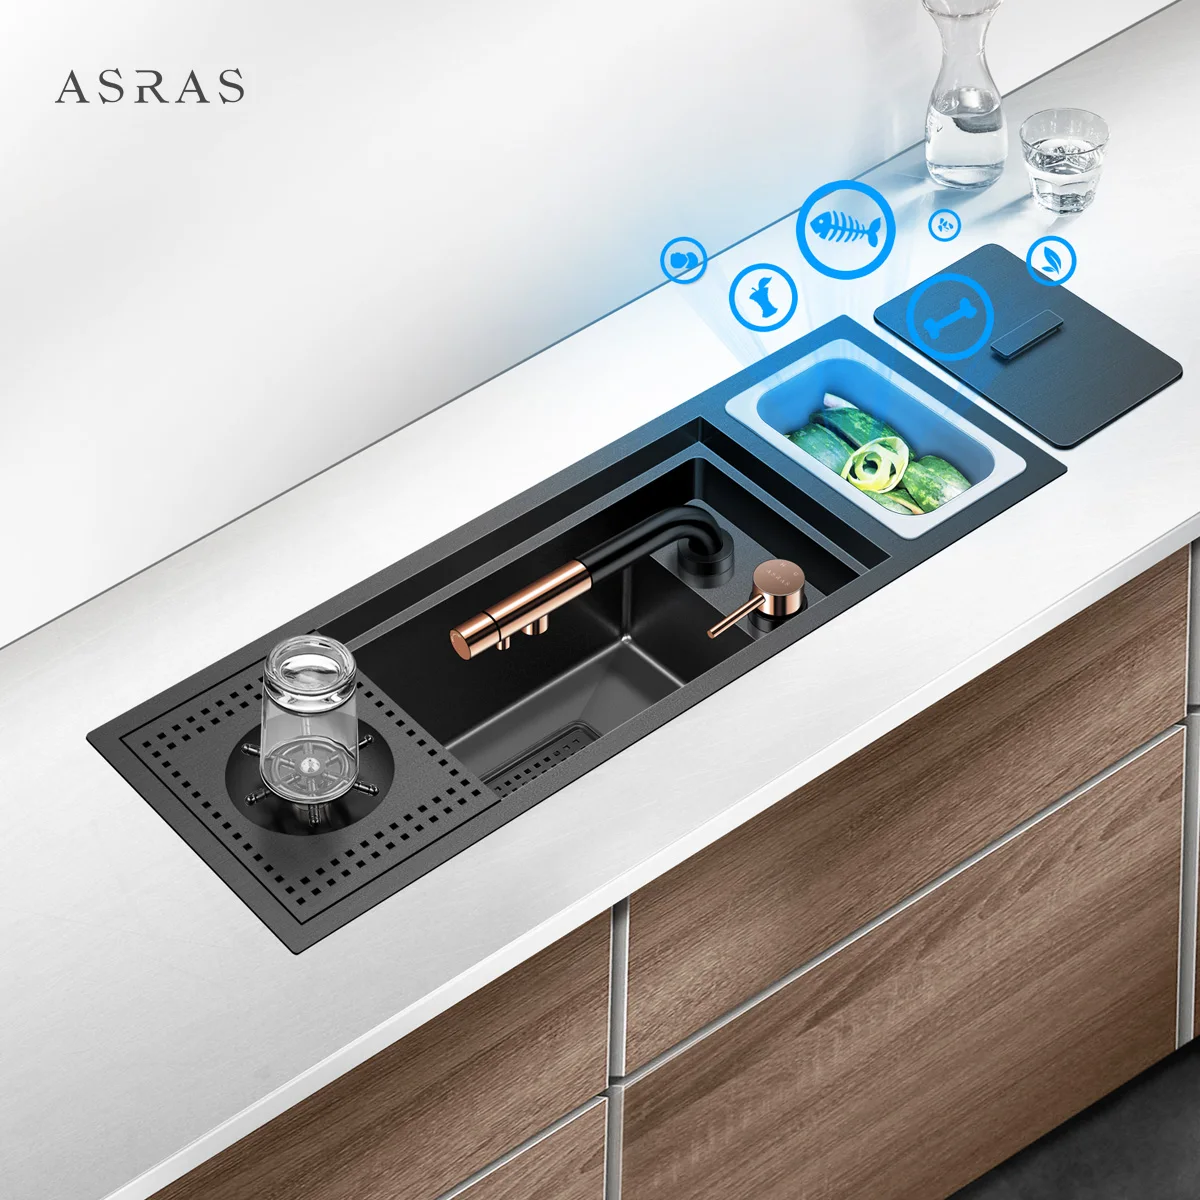 

ASRAS invisible sink black nano bar small single slot stainless steel dish washing basin middle island high pressure cup washer